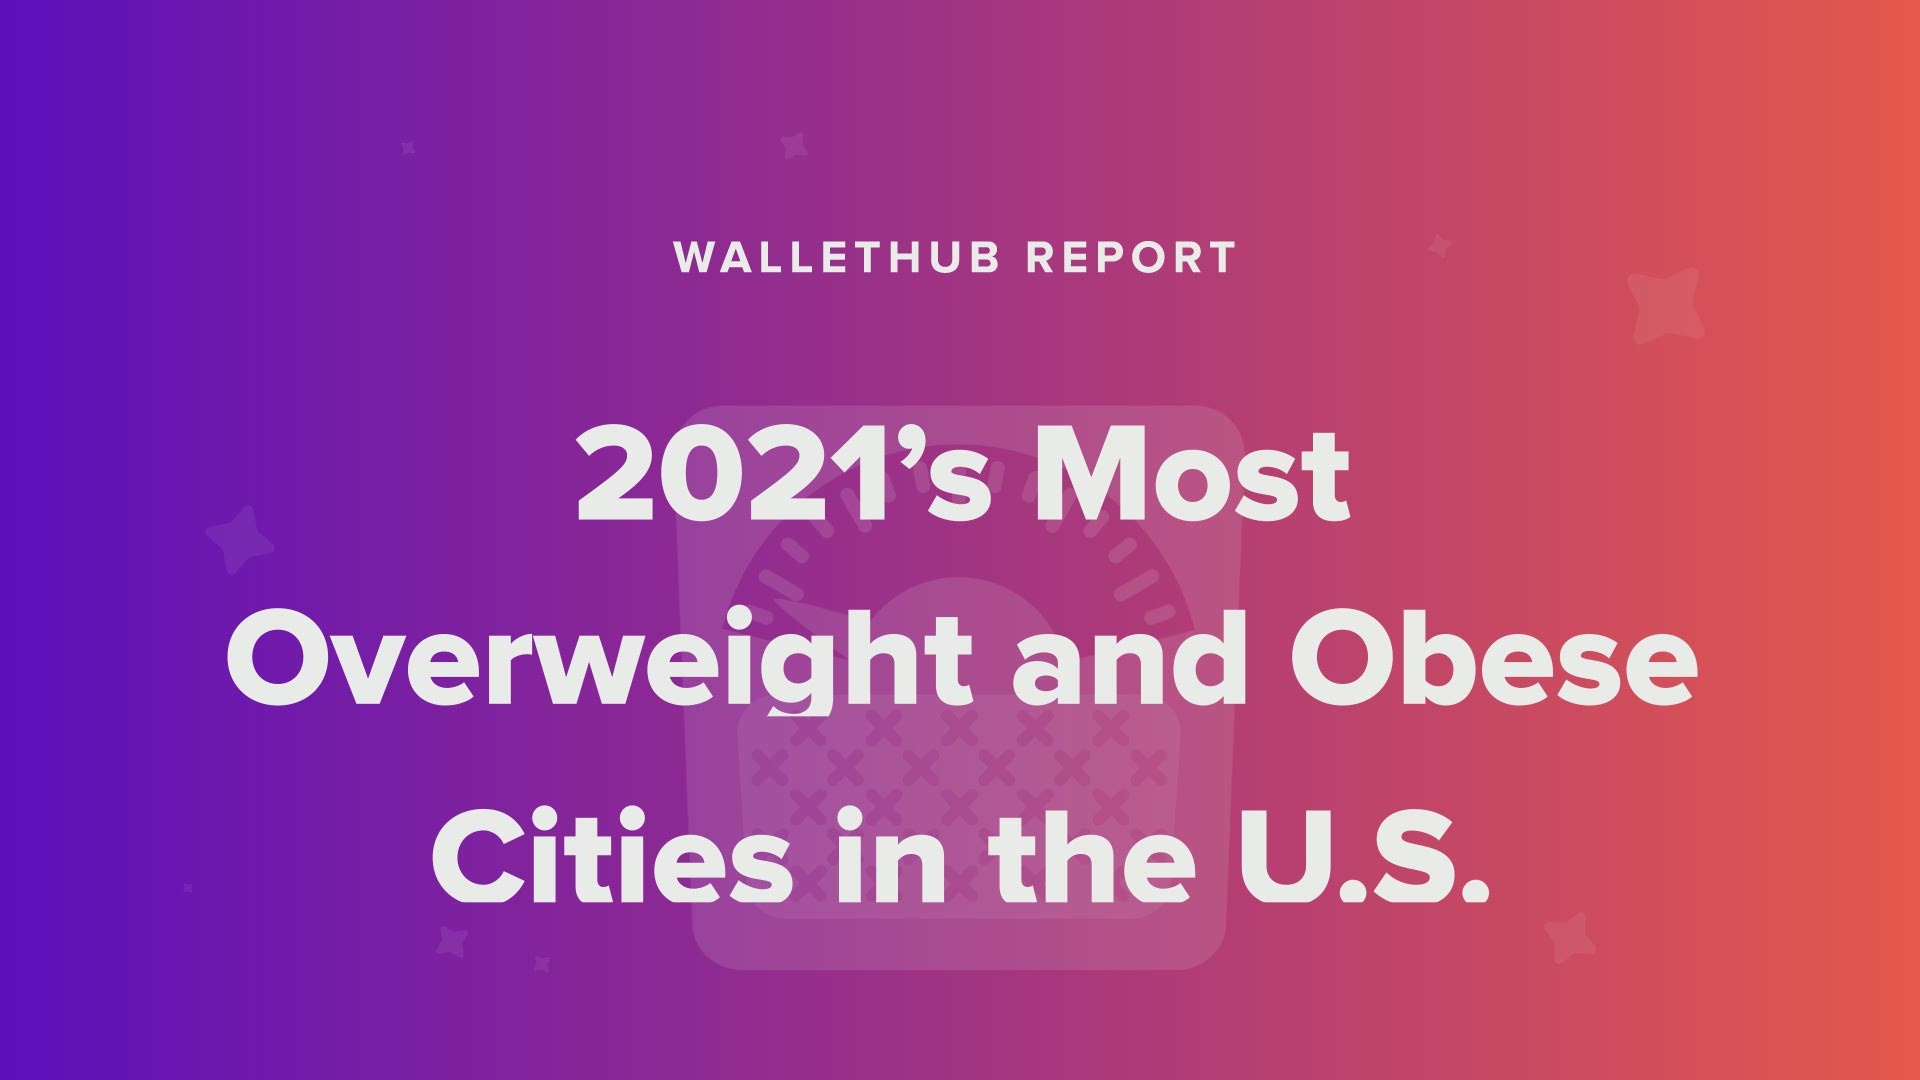 Accorinding to WalletHub.com (video courtesy), Memphis is the second fattest city in the United States of America.